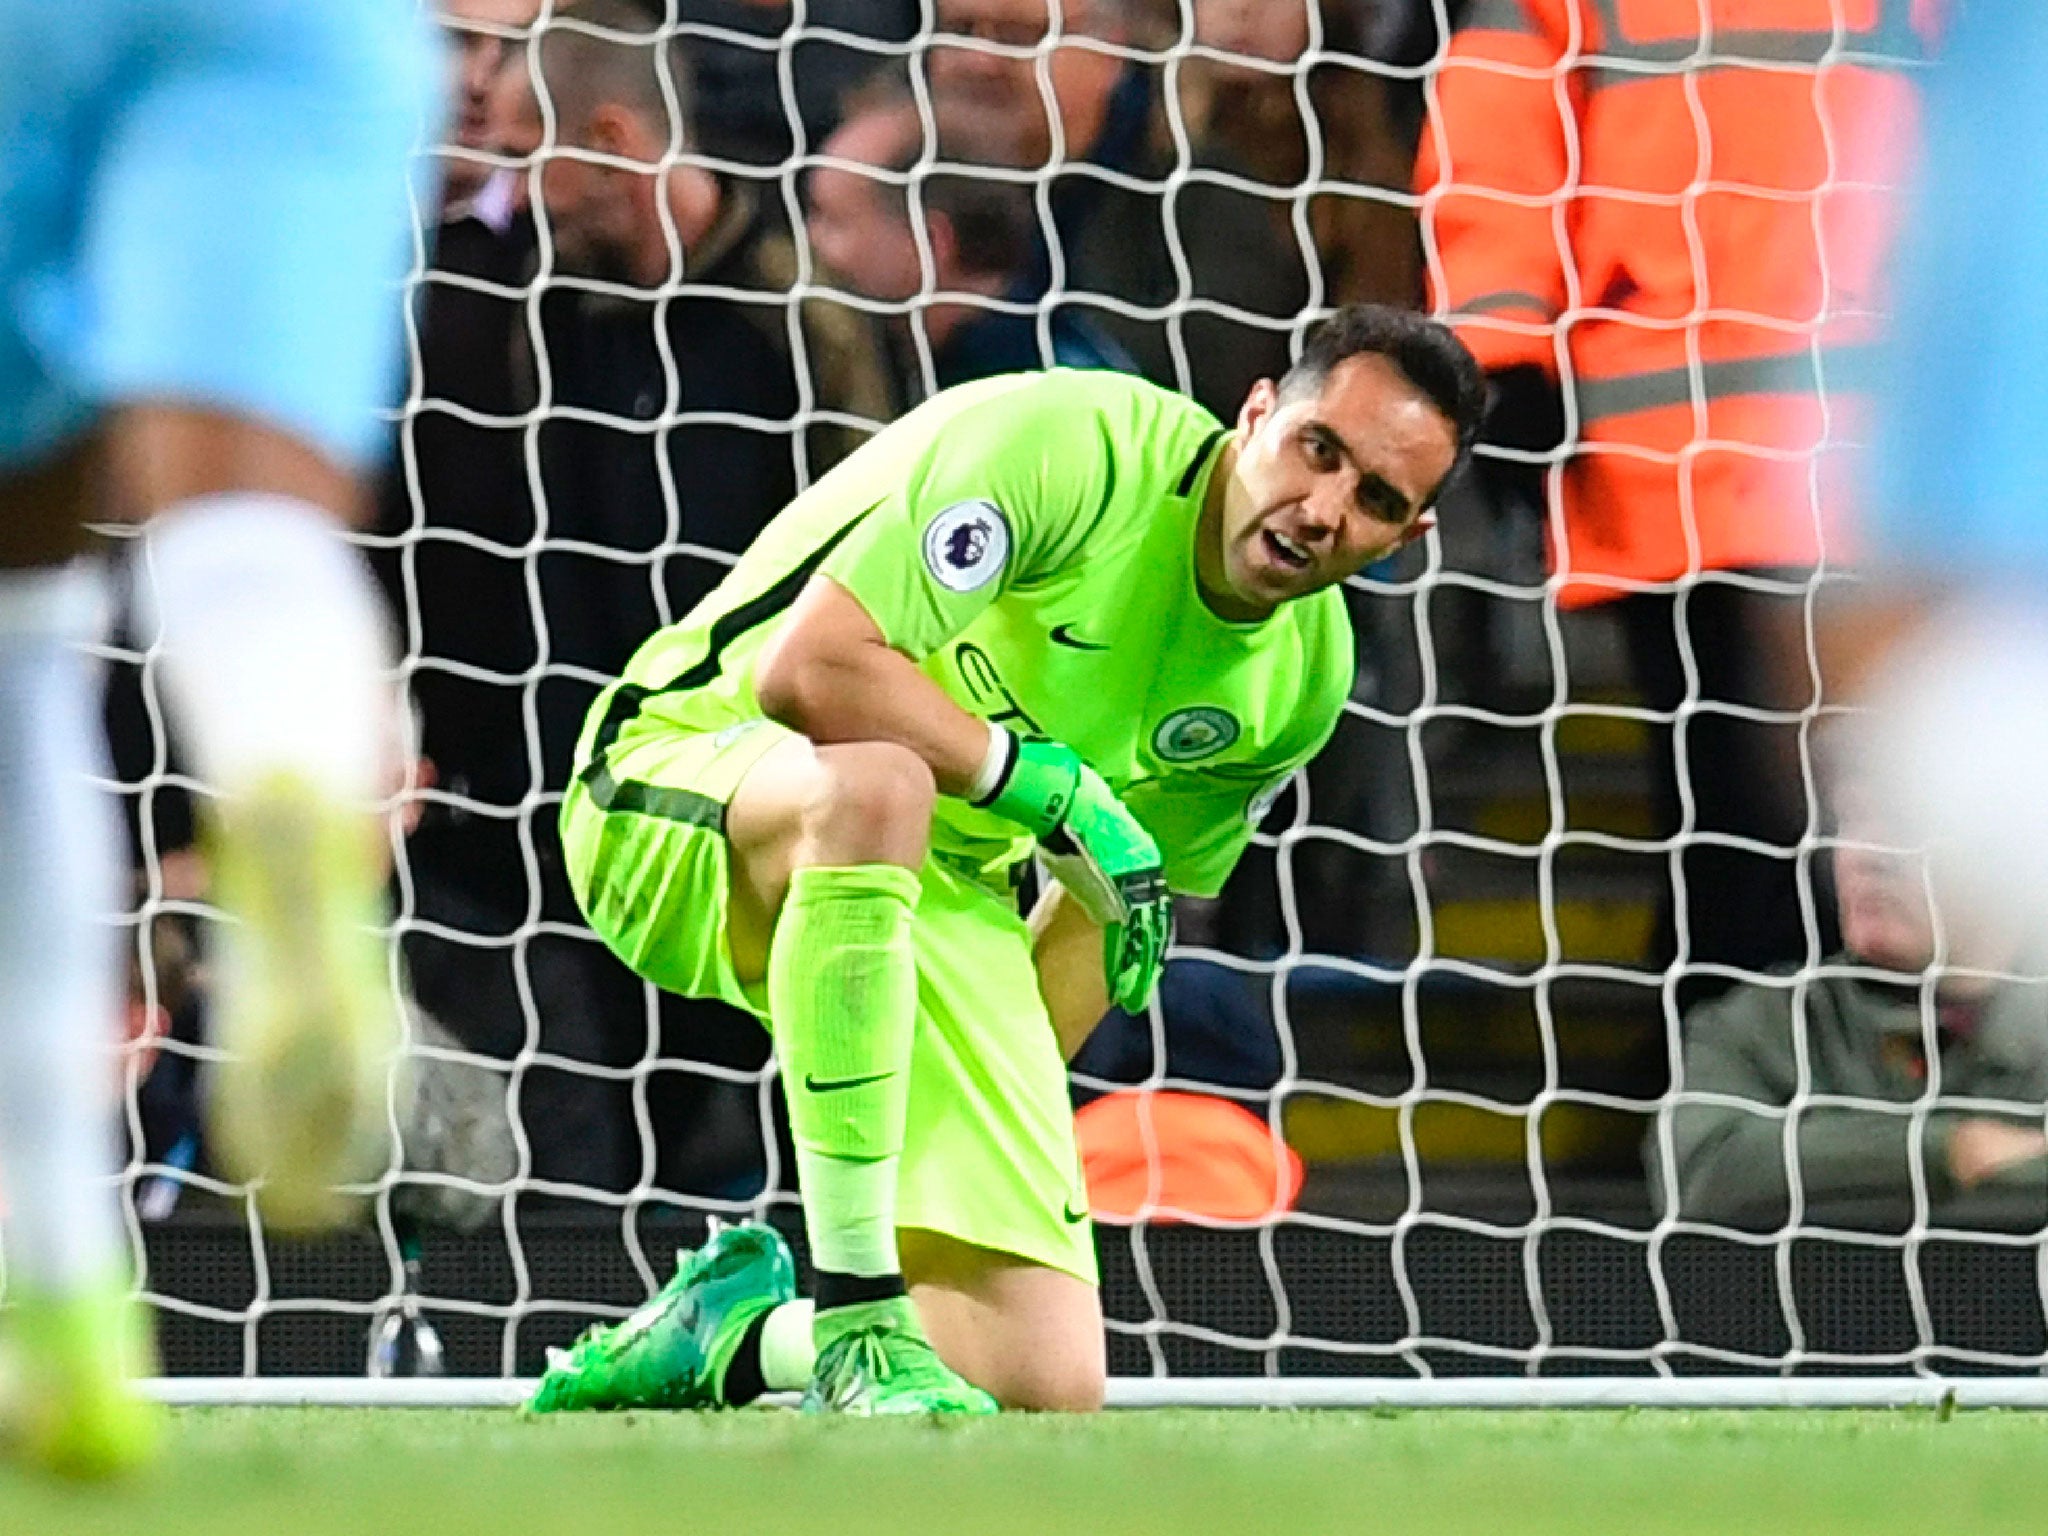 Claudio Bravo will not play again this season after suffering a calf injury